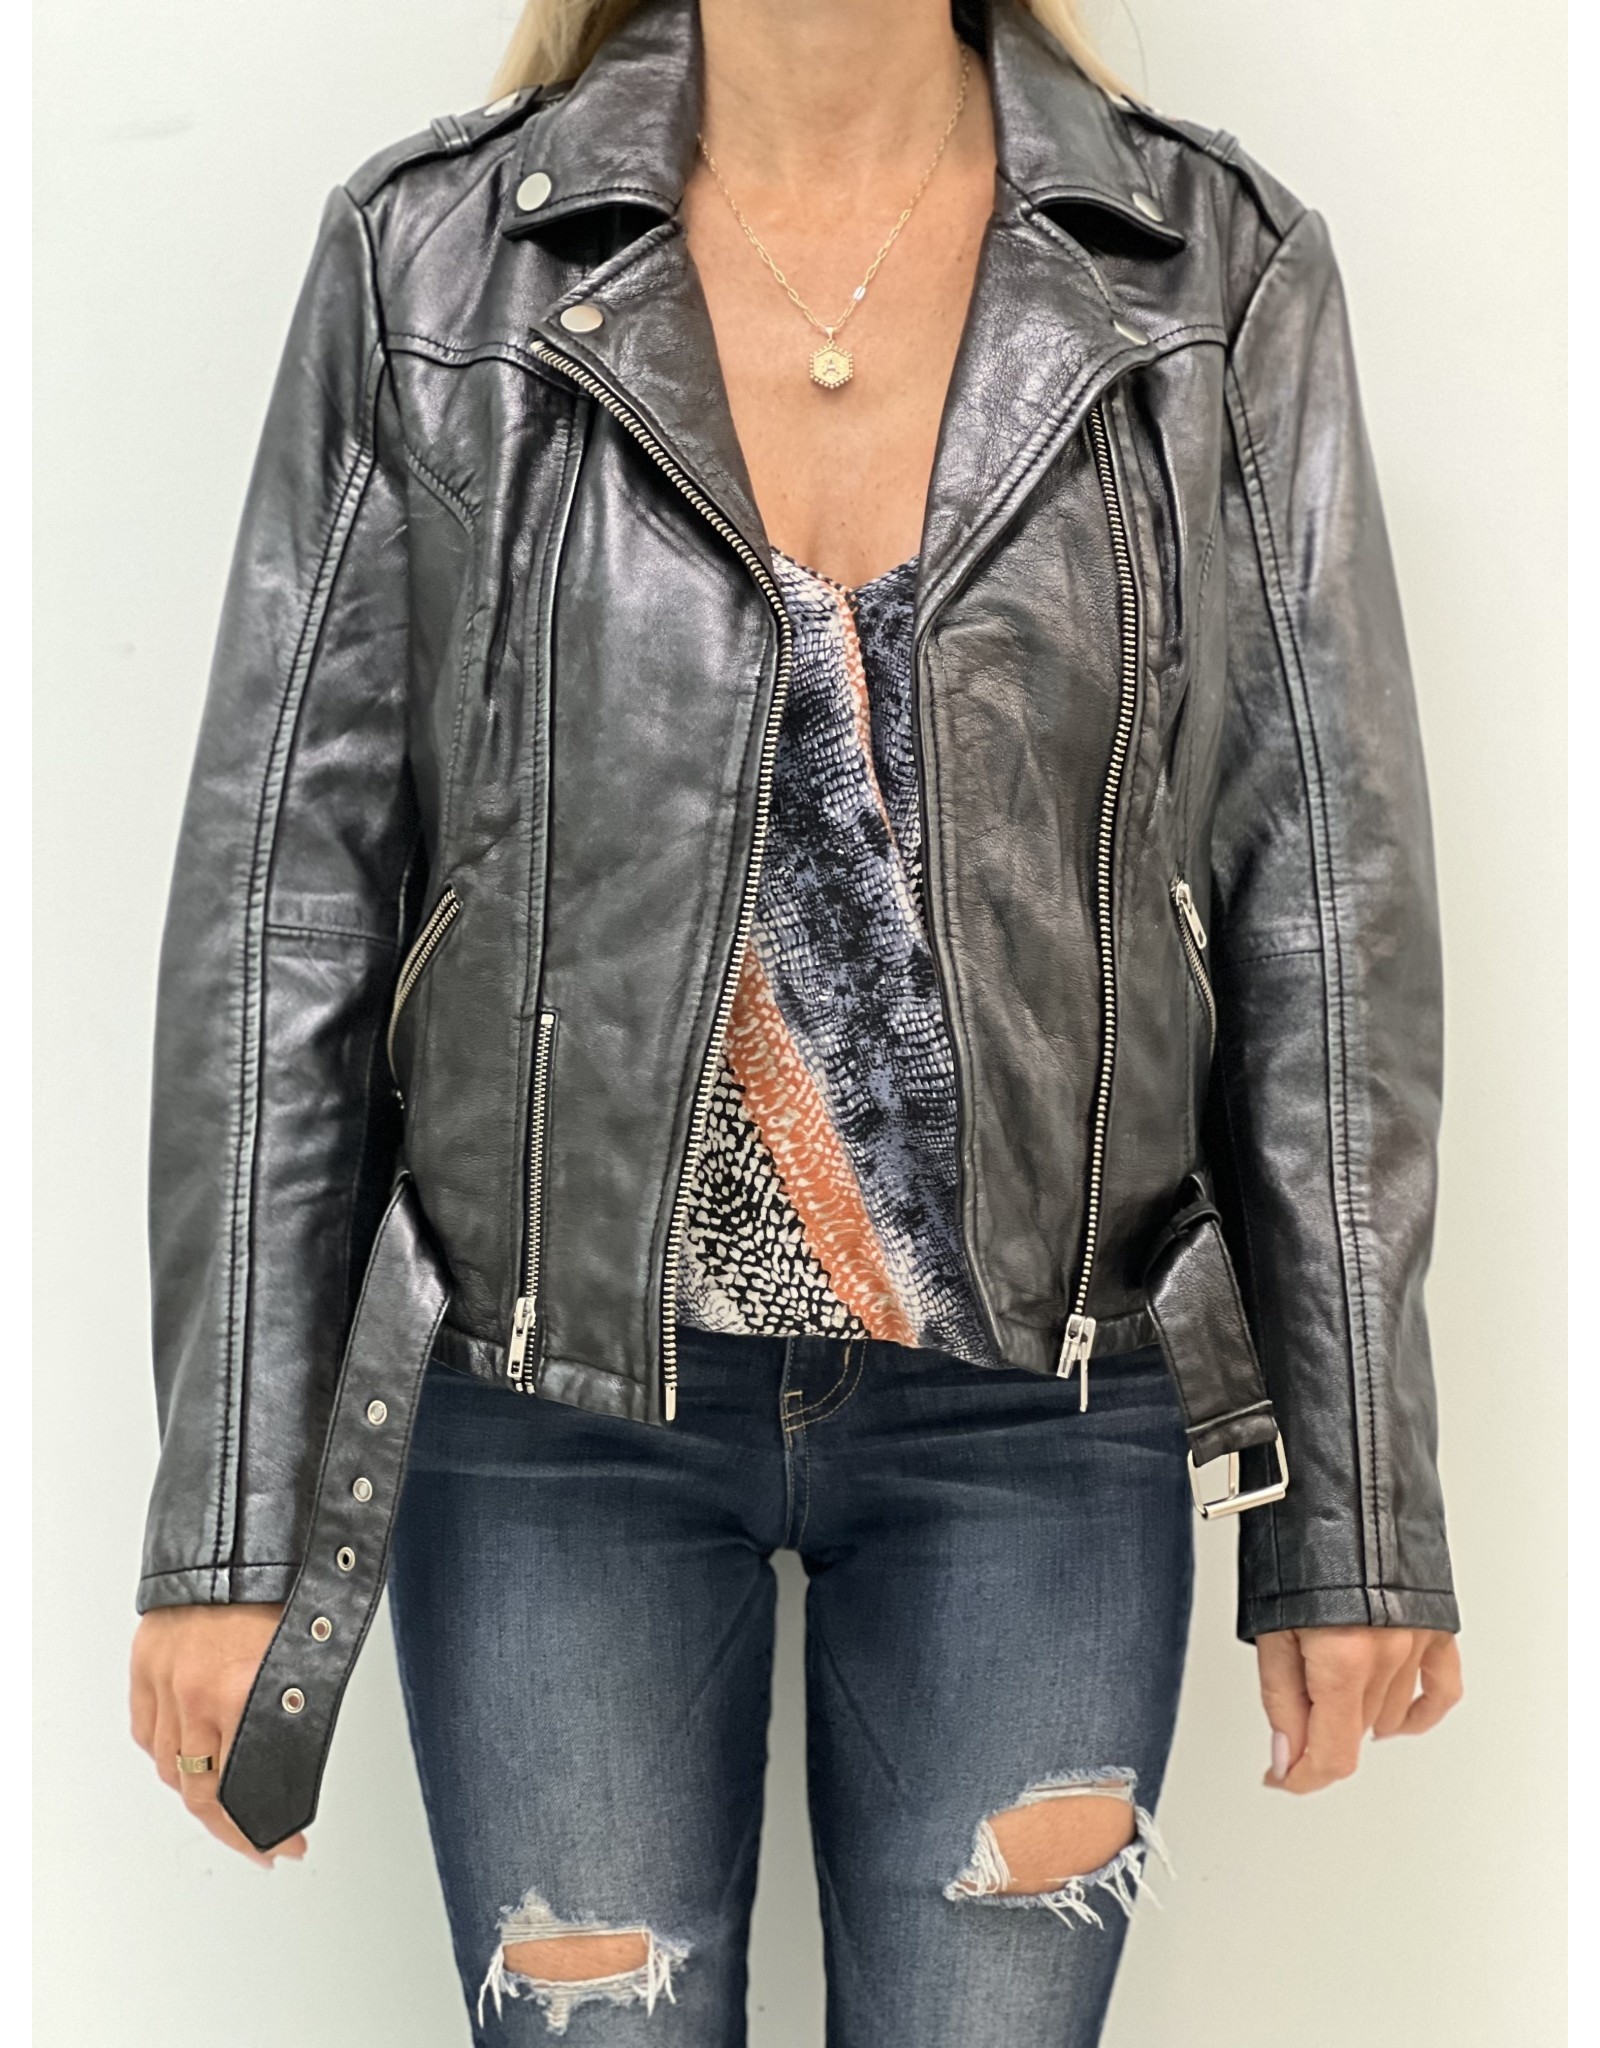 Analili All Nghter Black Leather Jacket